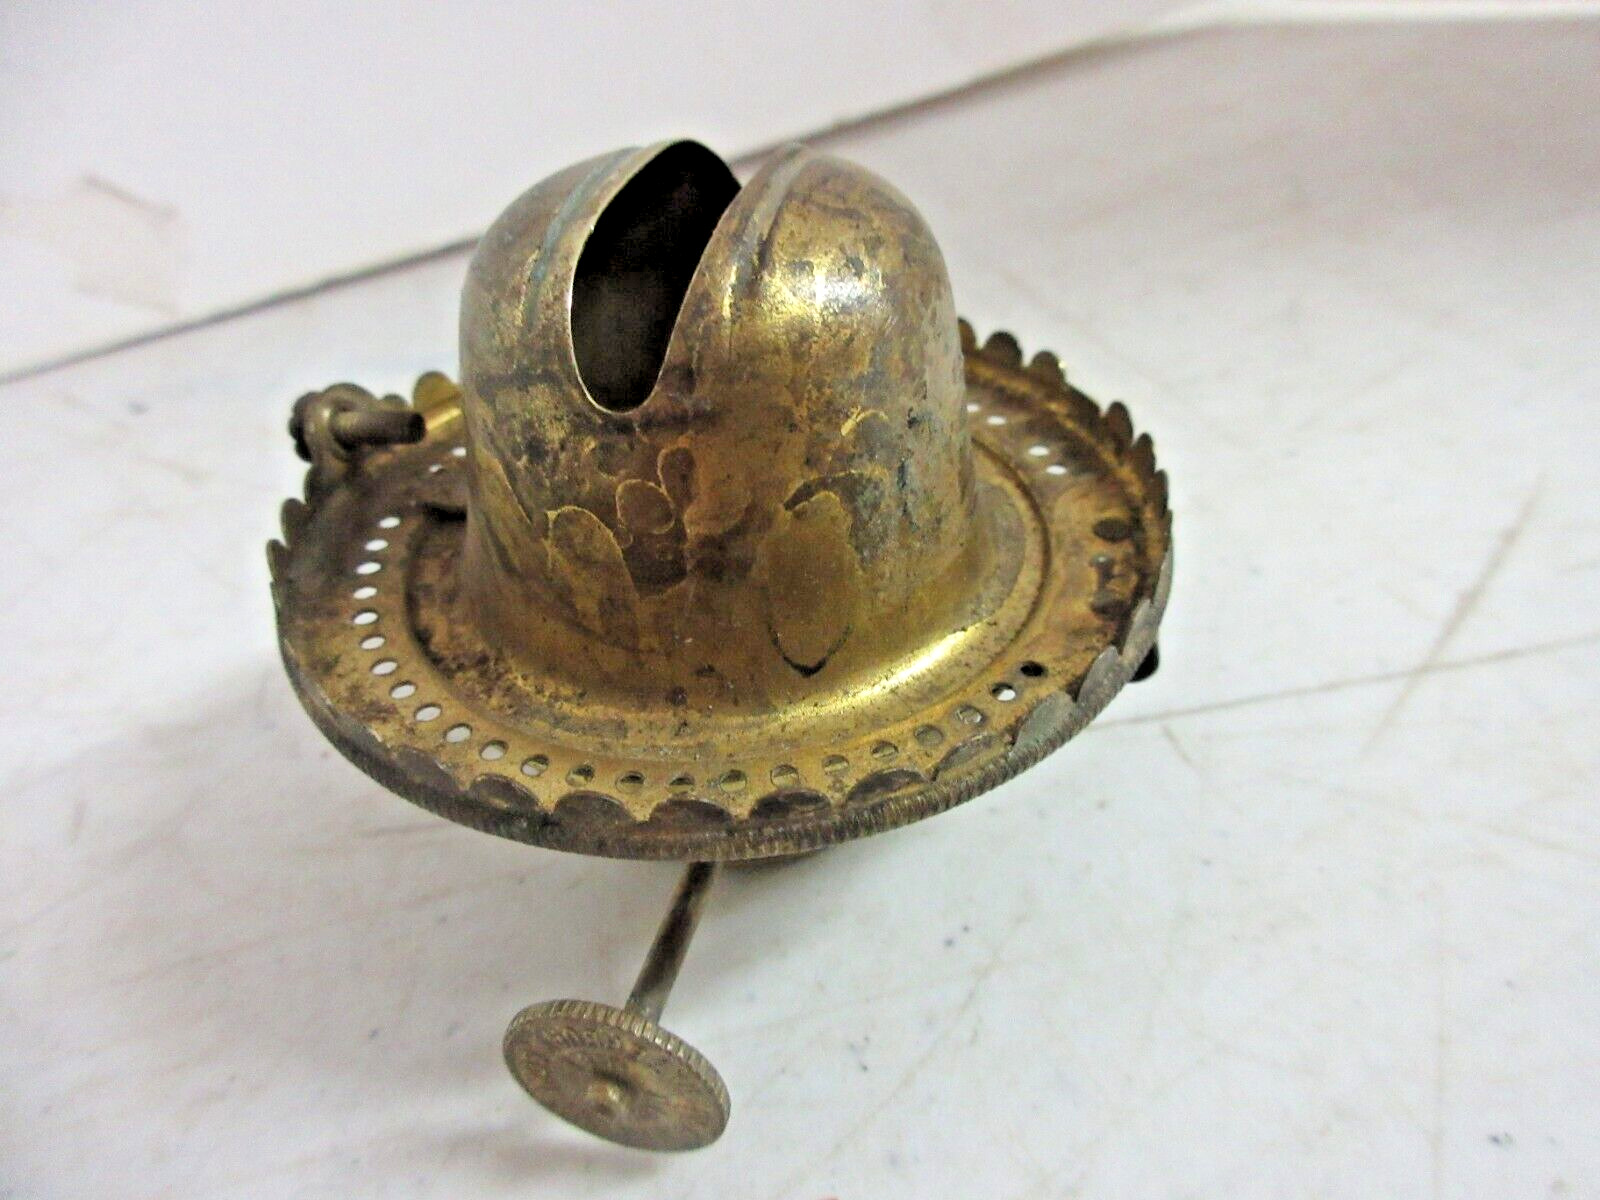 ANTIQUE P&A PLUME & ATWOOD BRASS #2 OIL LAMP LIP BURNER WITH SET SCREW